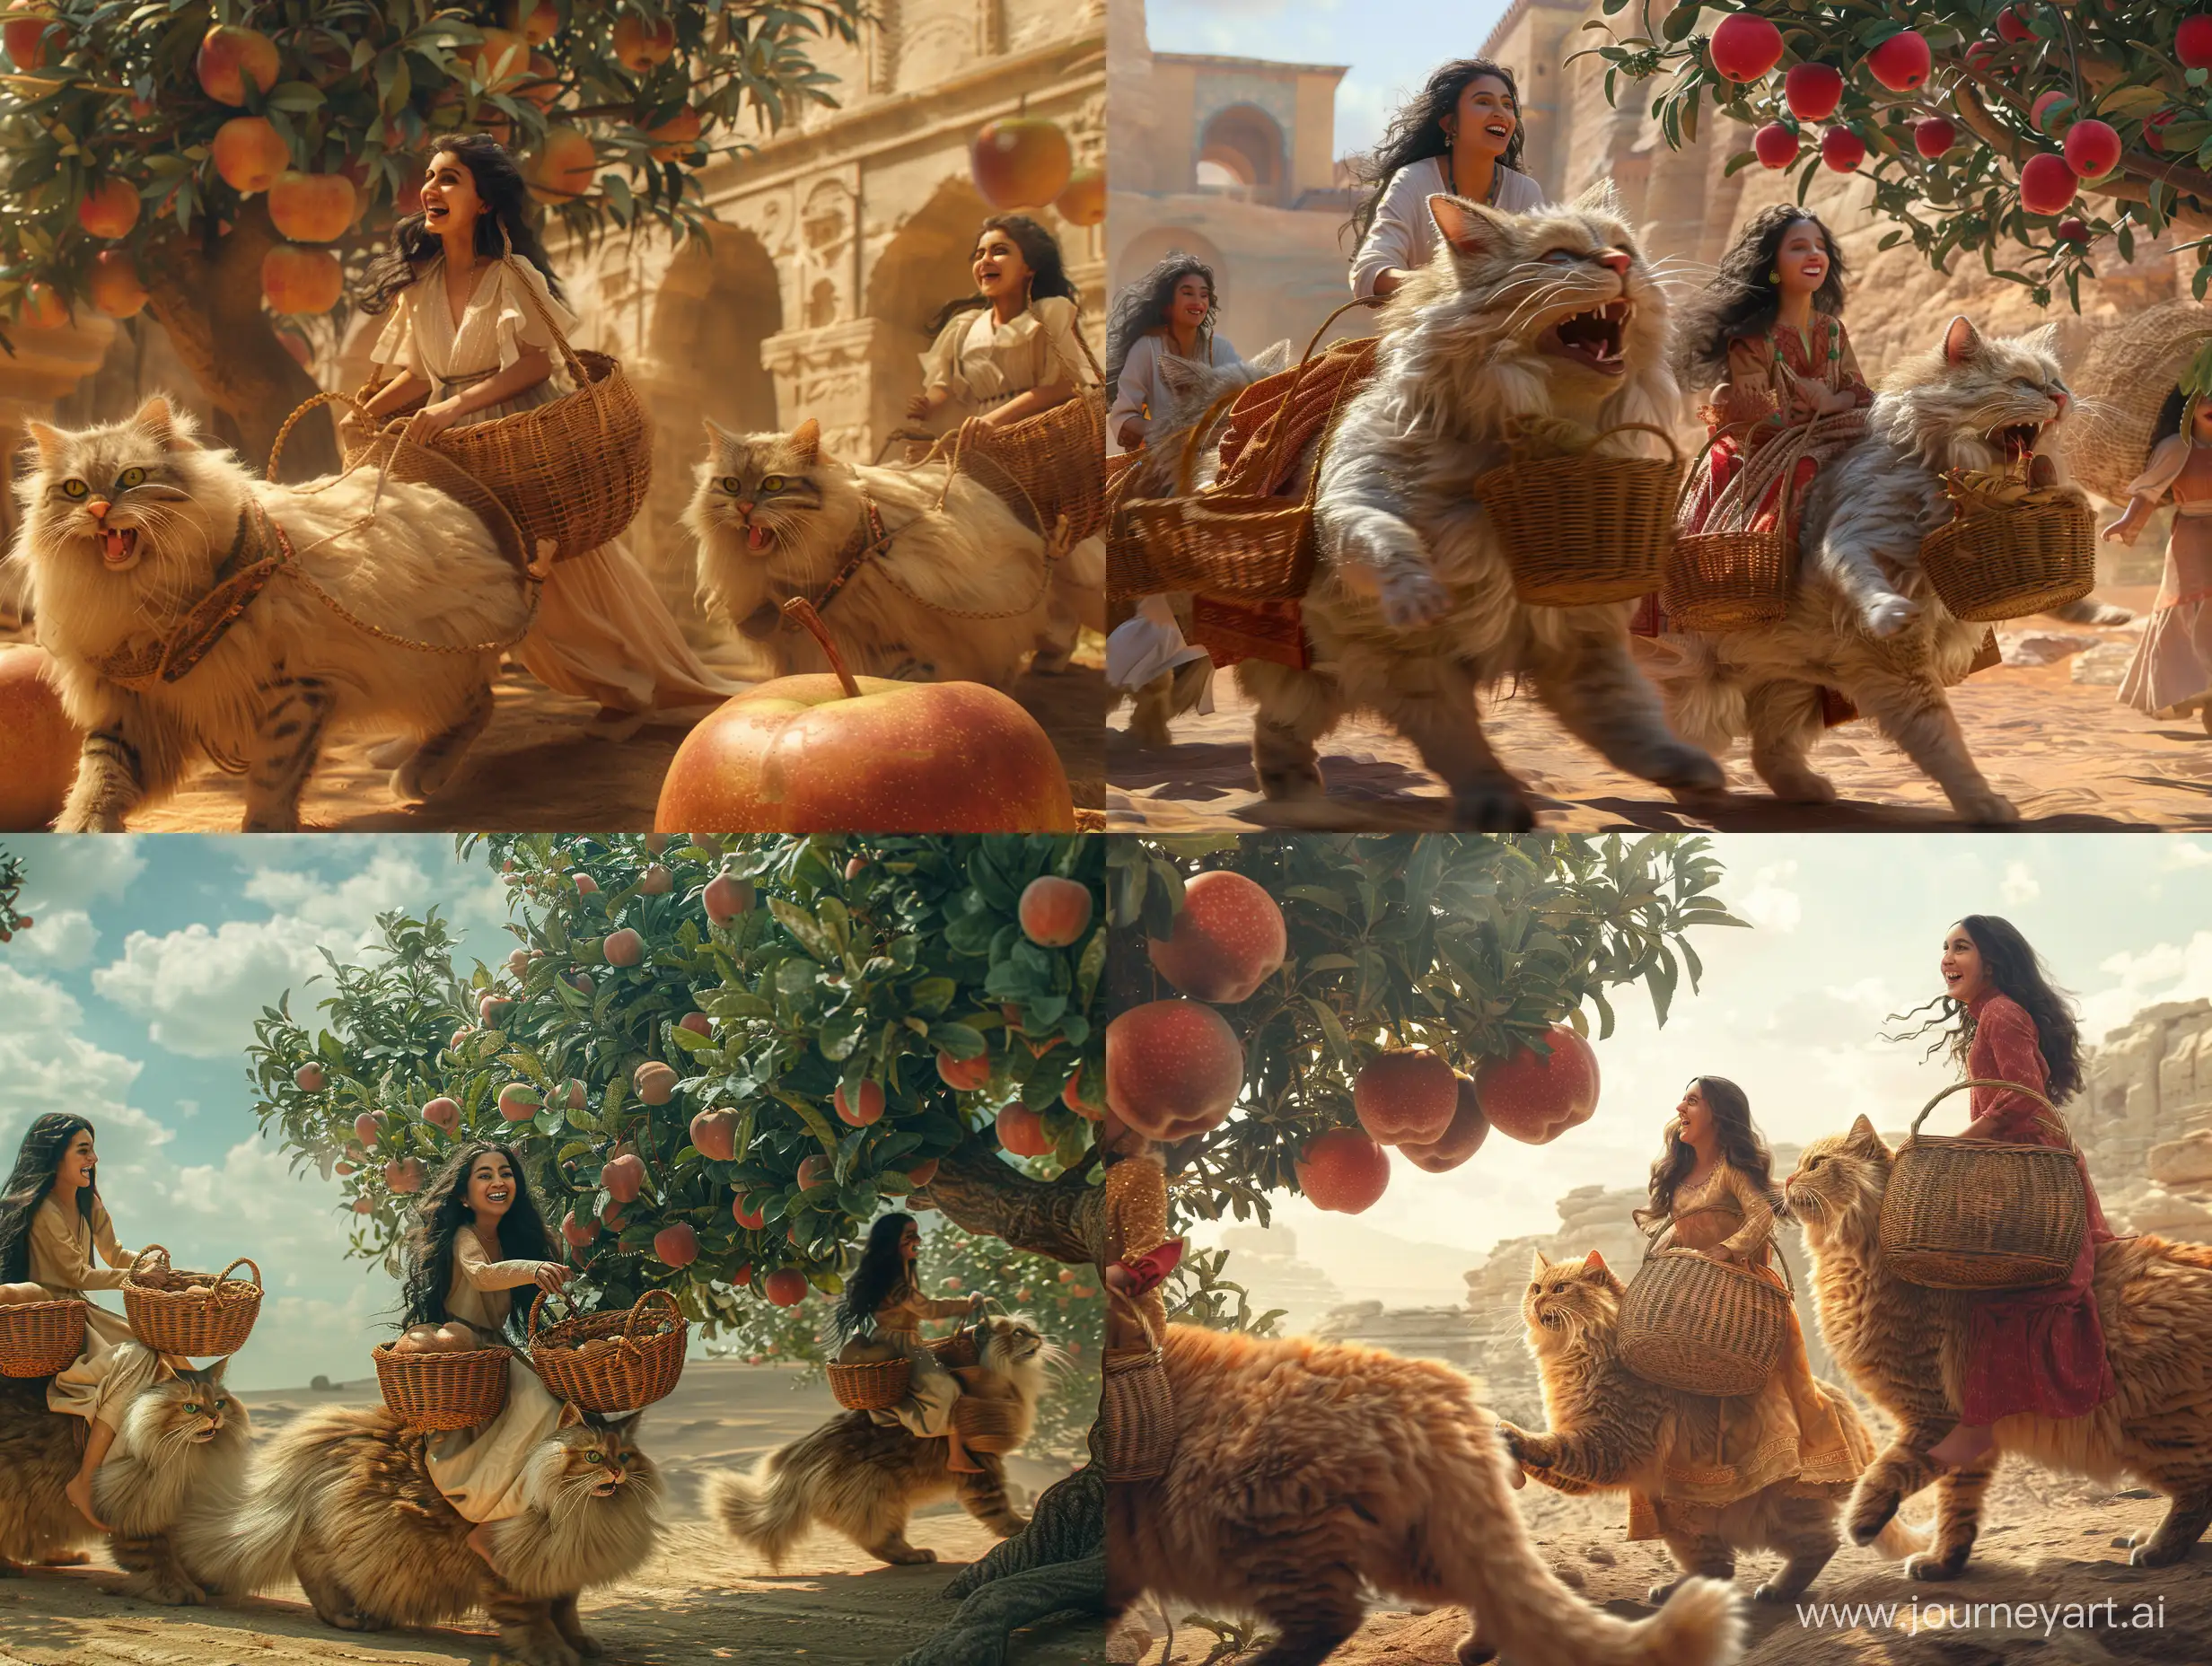 Young Persian women, happily and laughing, riding giant Persian cats, carrying wicker baskets, approach a giant apple tree with apples as big as watermelons. in a desert, in an ancient civilization, cinematic, epic realism,8K, highly detailed, long shot technique, backlit, glamour lighting